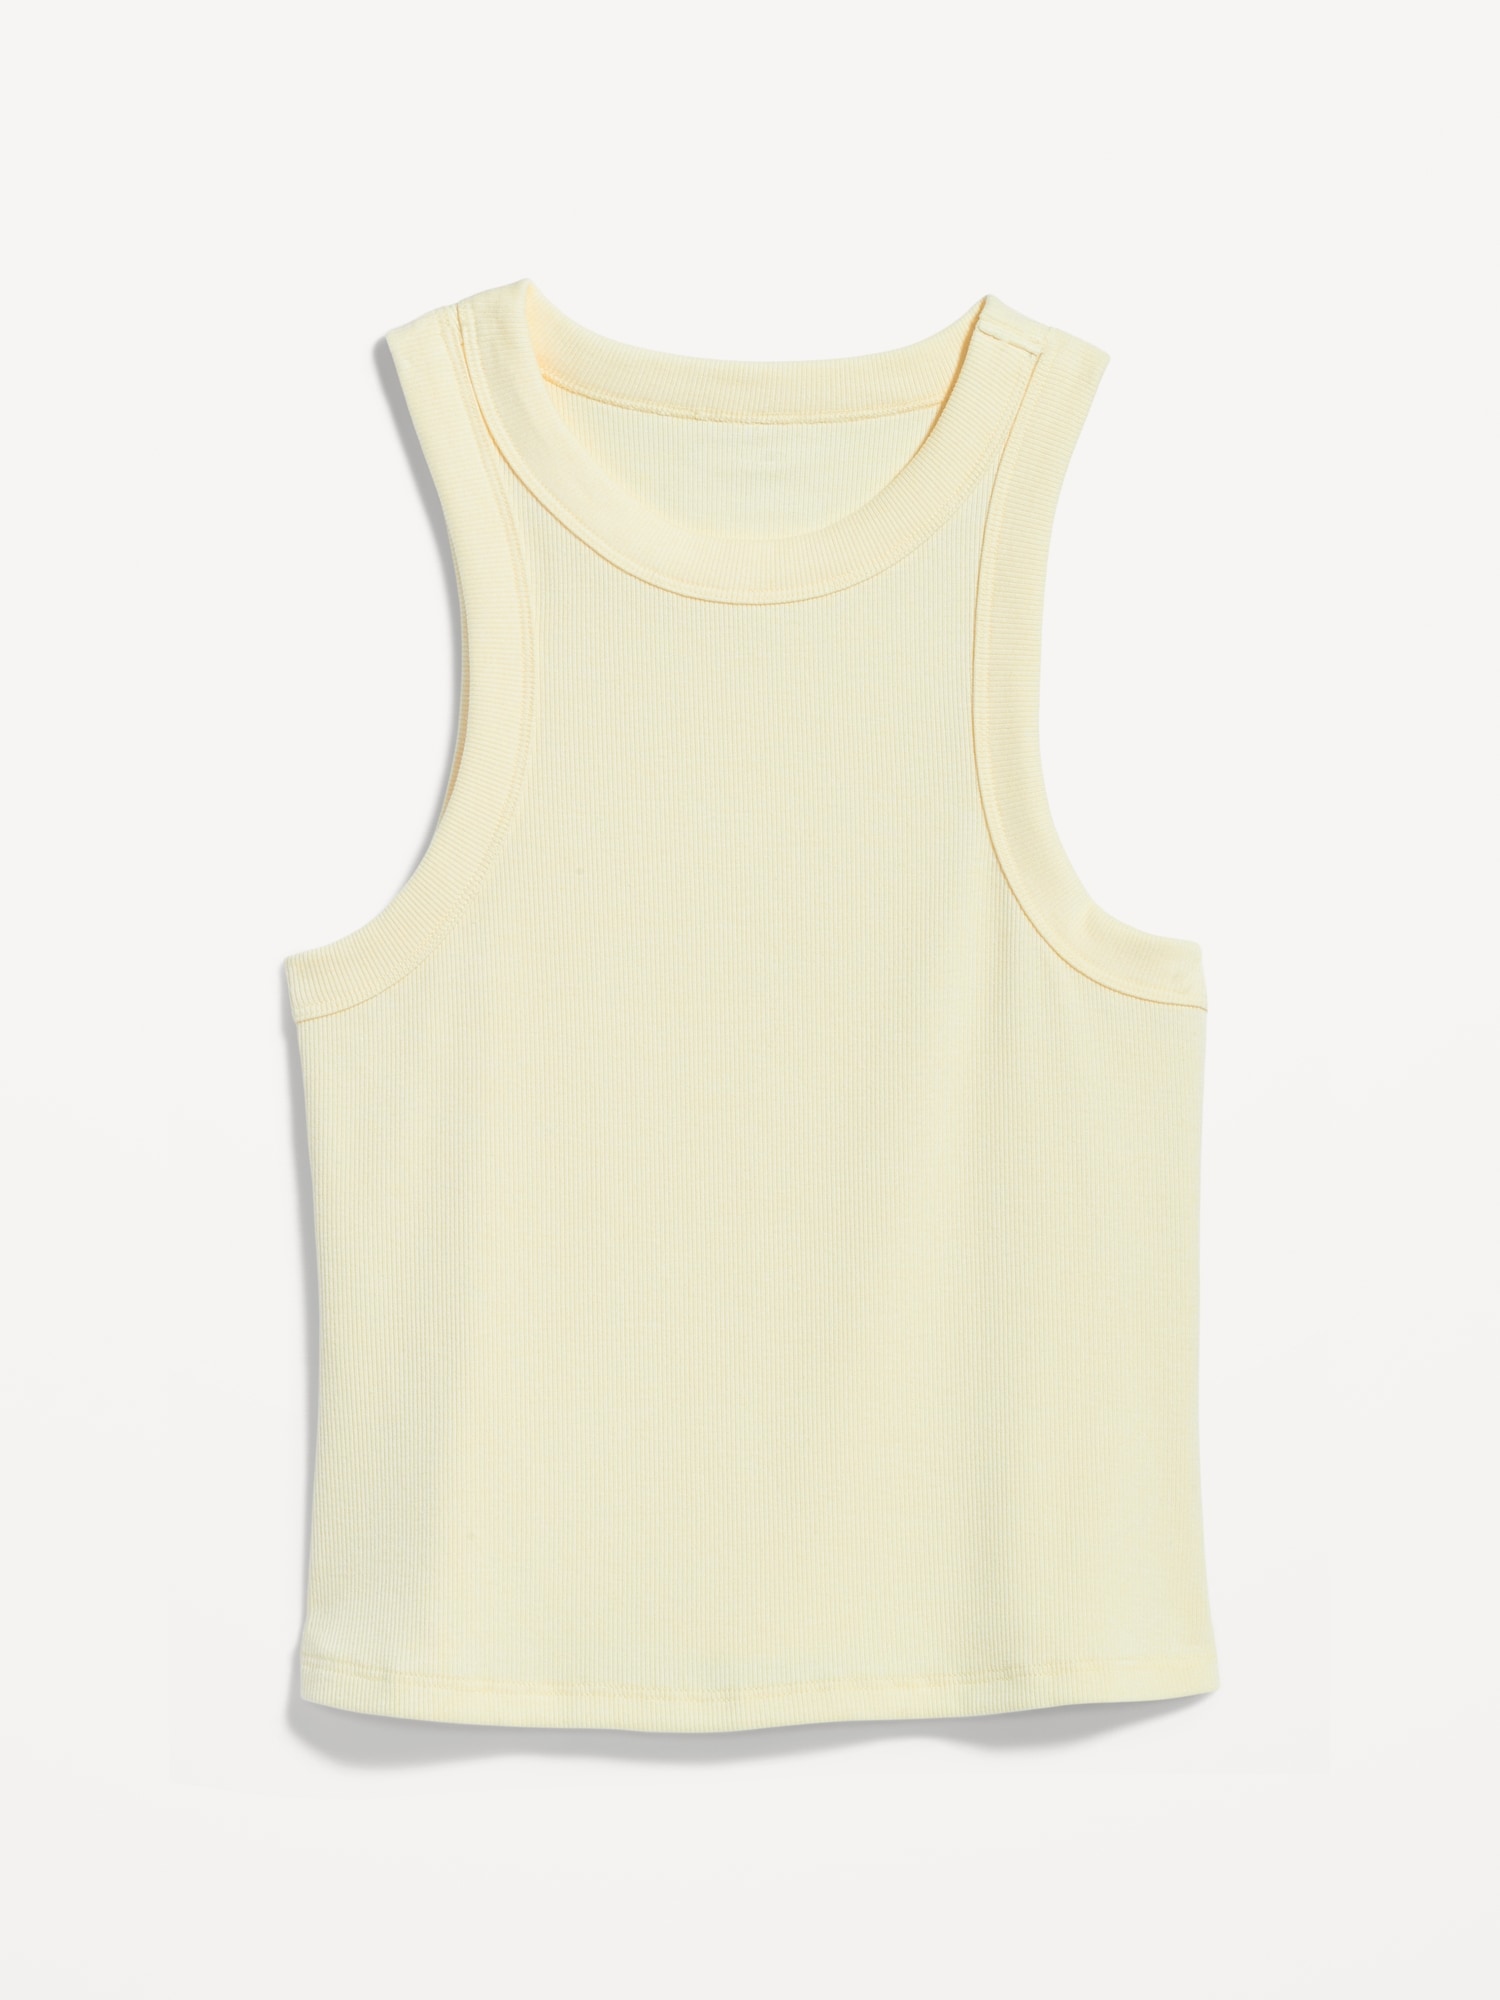 Old Navy Snug Cropped Tank Top yellow. 1